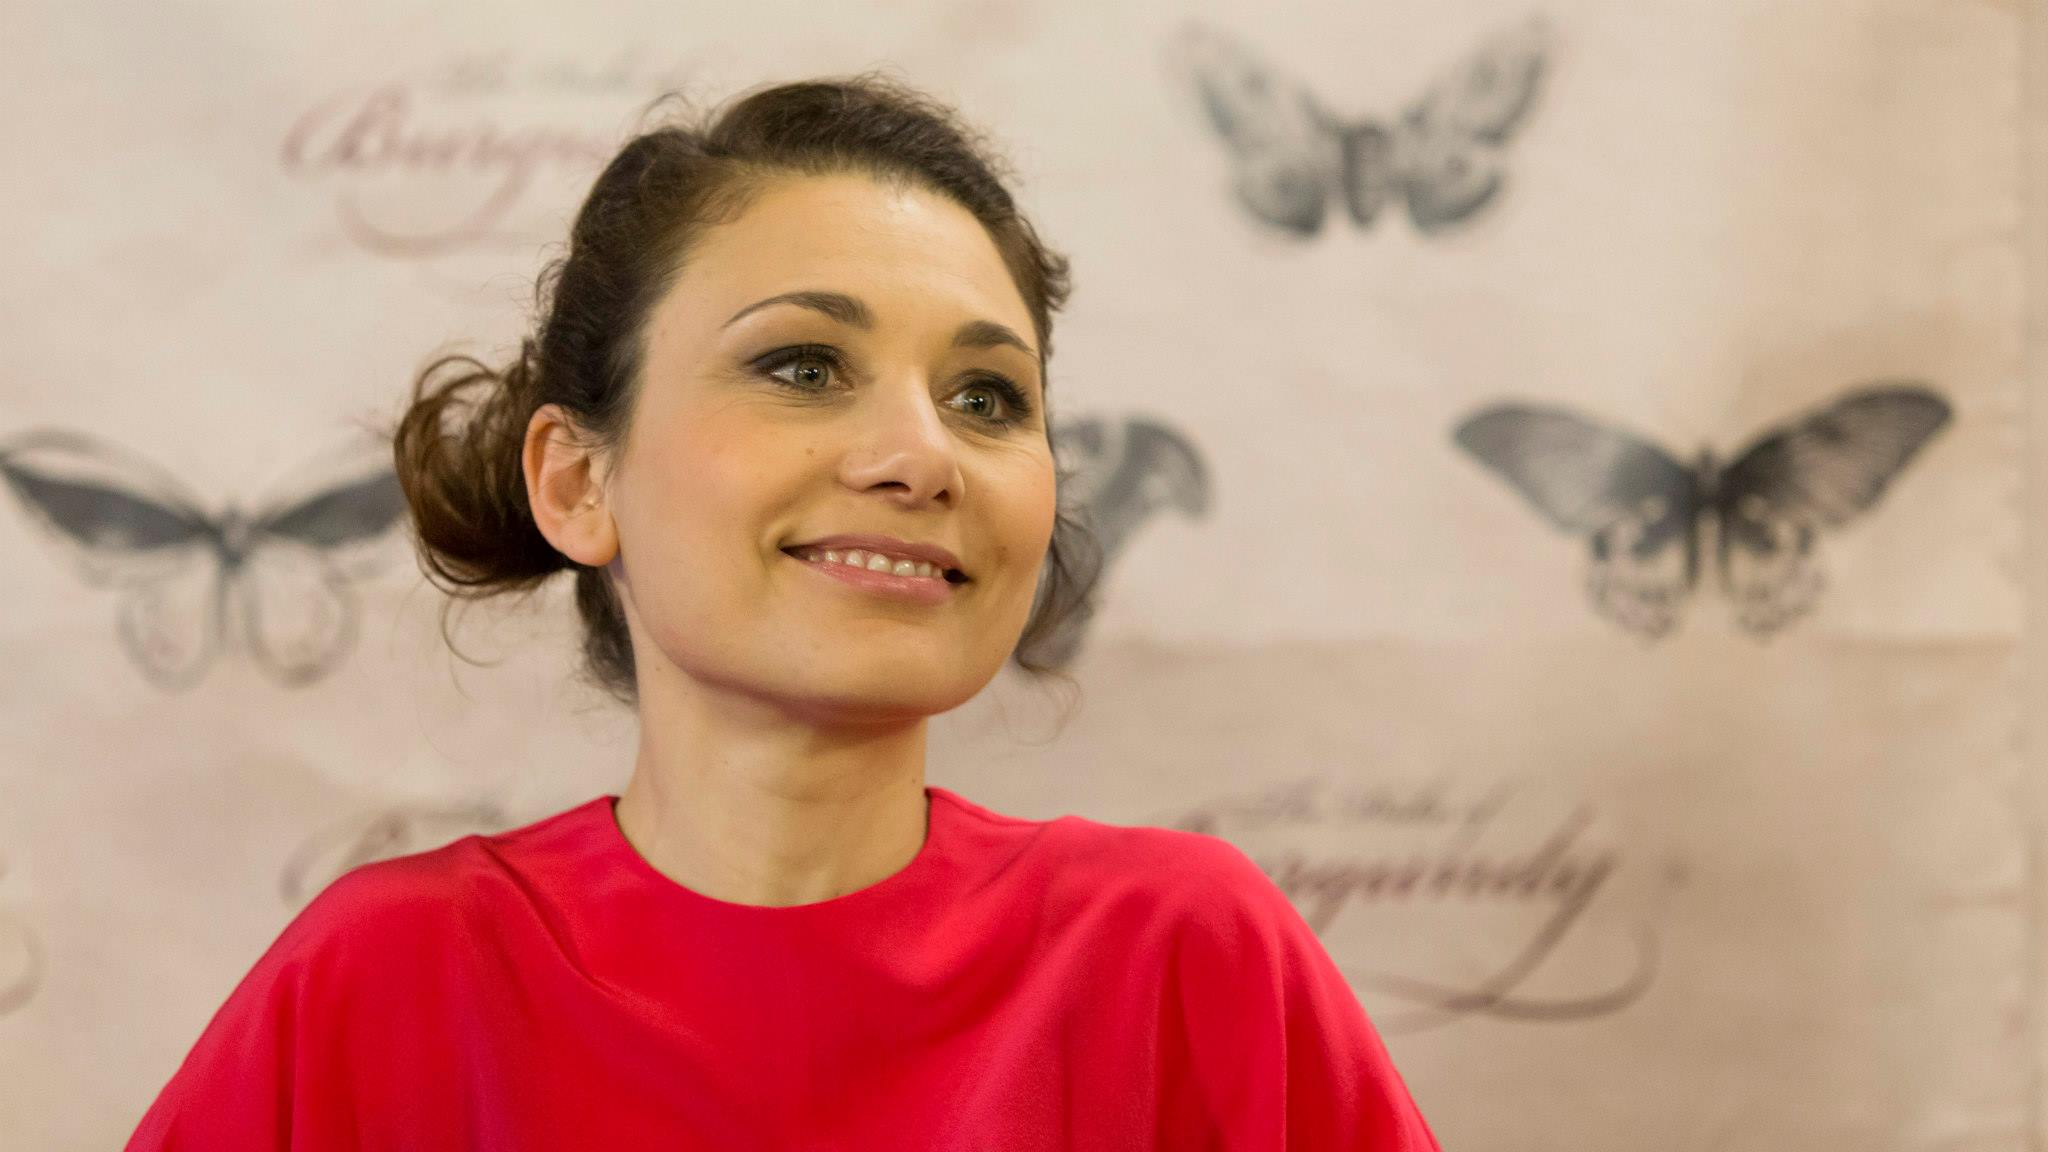 Chiara D'Anna at the Duke of Burgundy Hungarian premiere in Budapest. April 2015